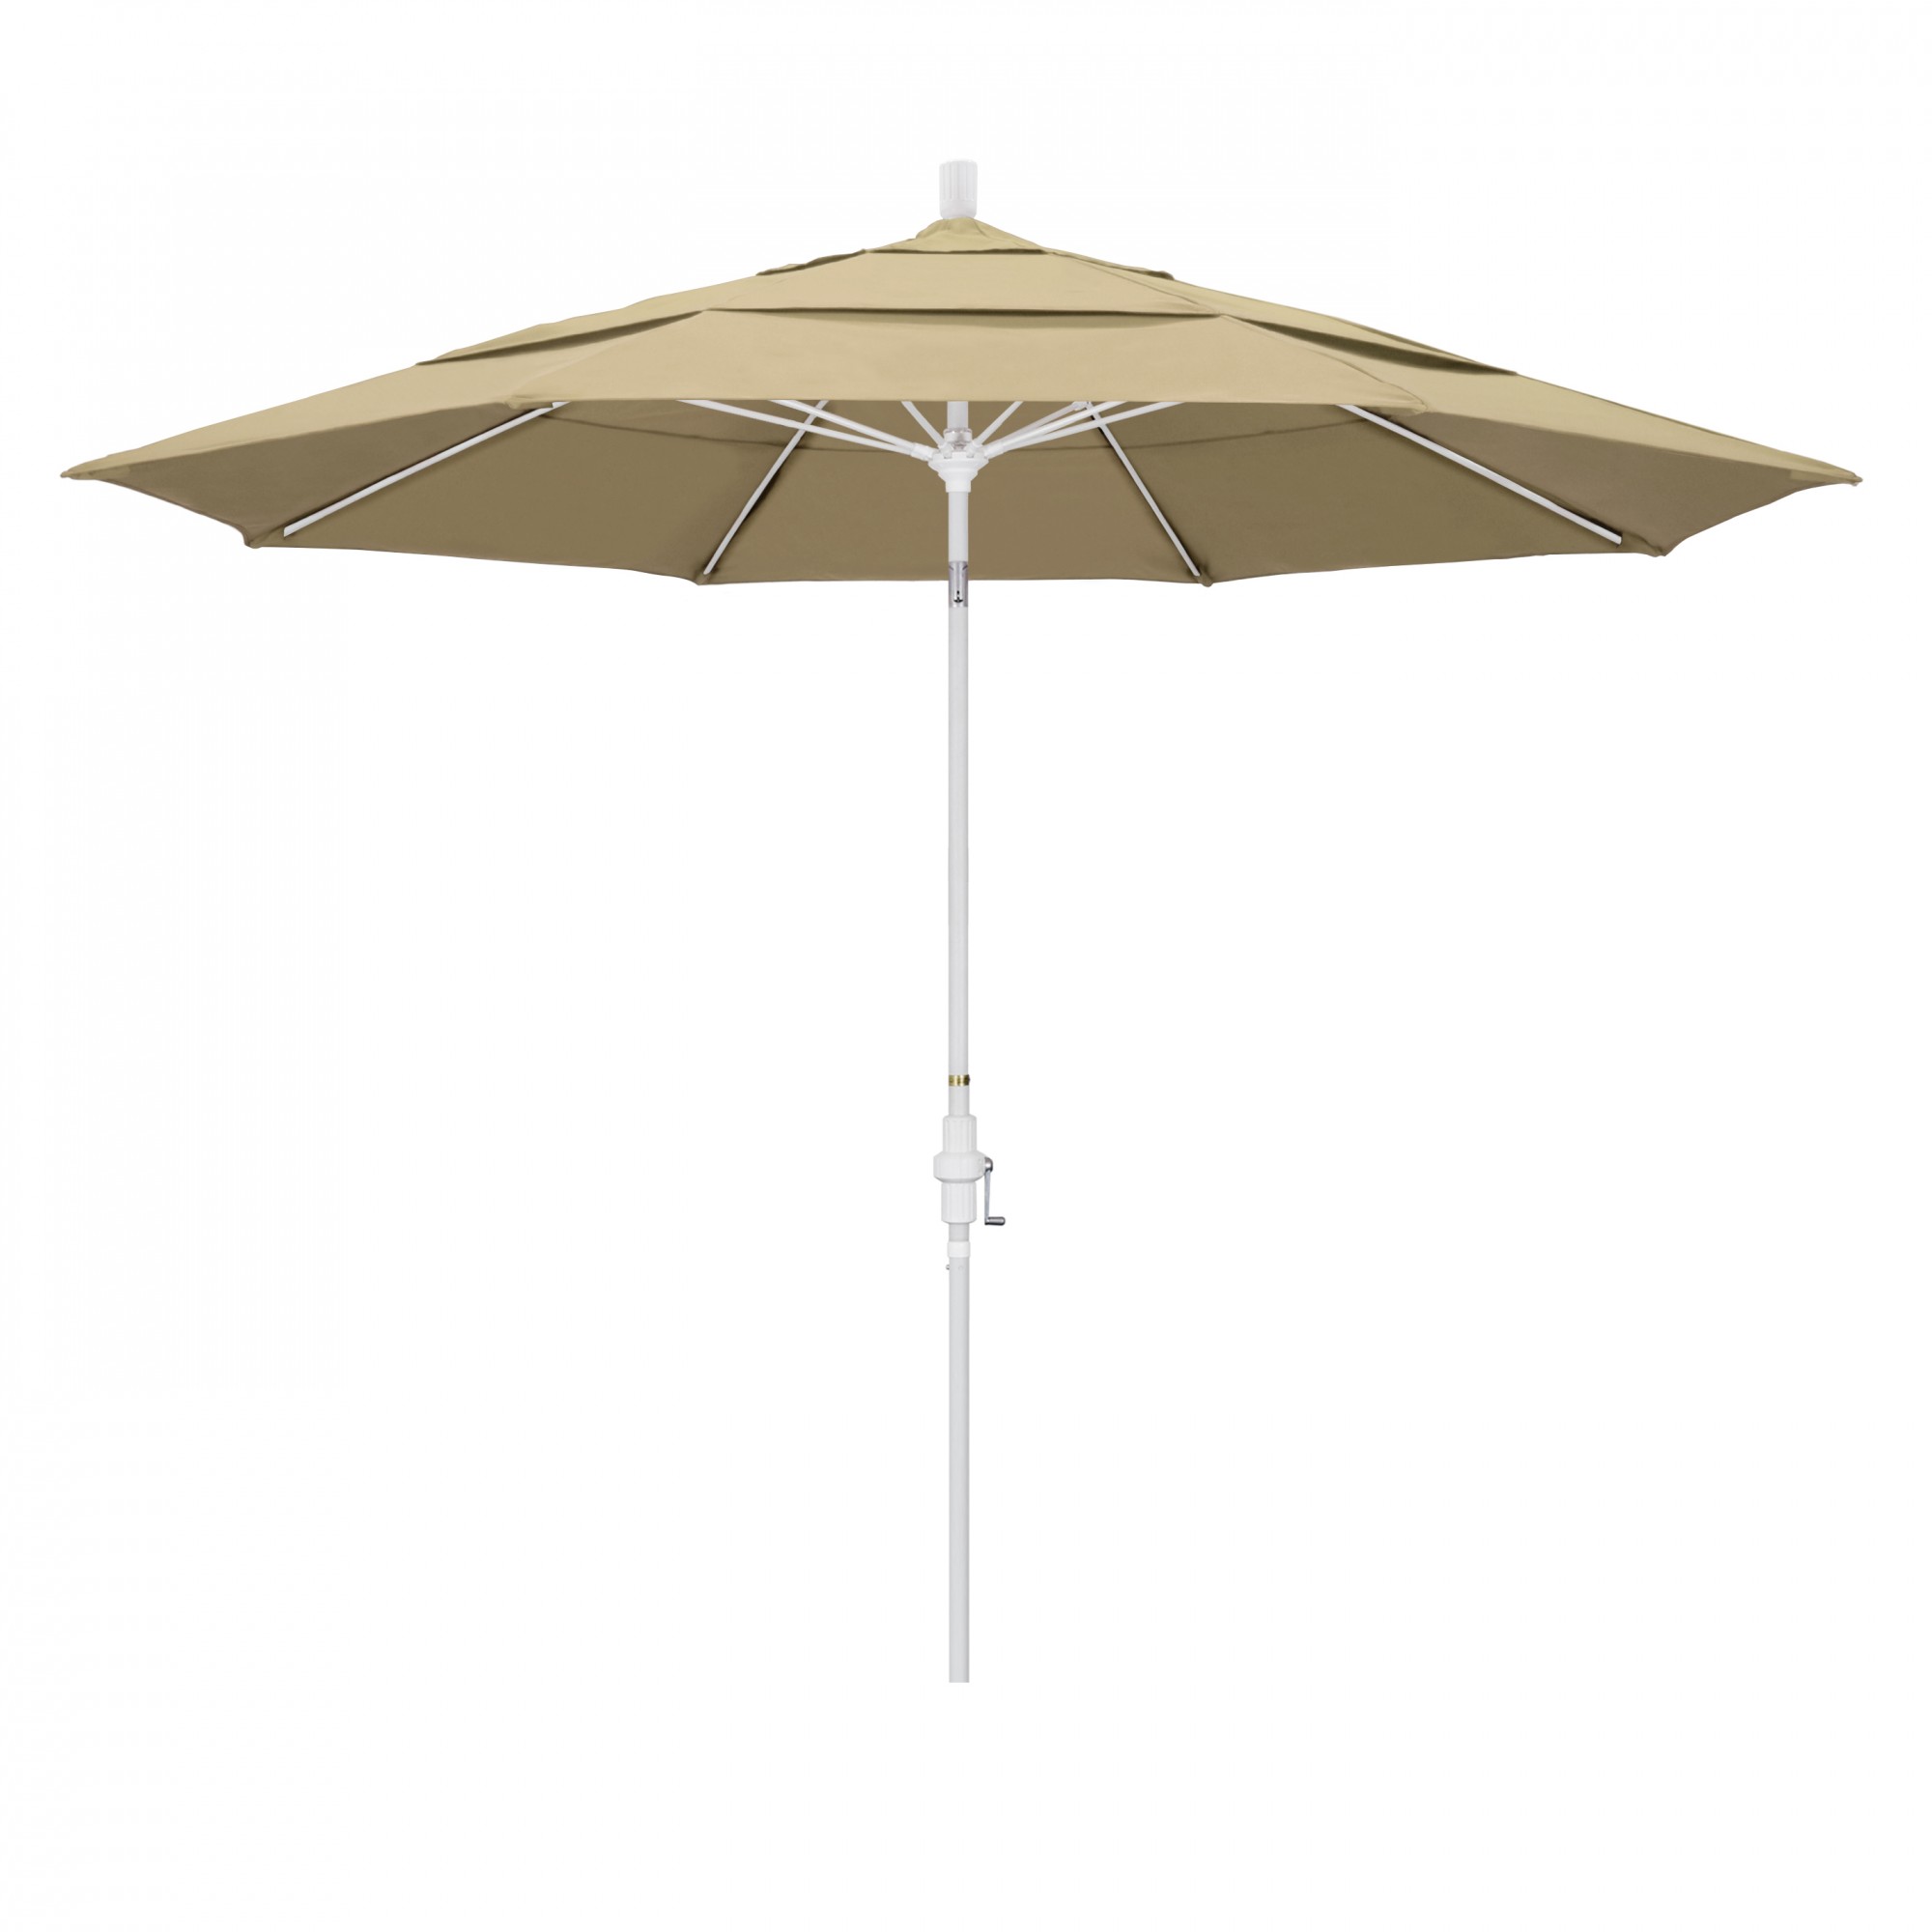 Outdoor Living and Style 11ft Outdoor Sun Master Series Patio Umbrella With Crank Lift and Collar-Tilt System, Beige